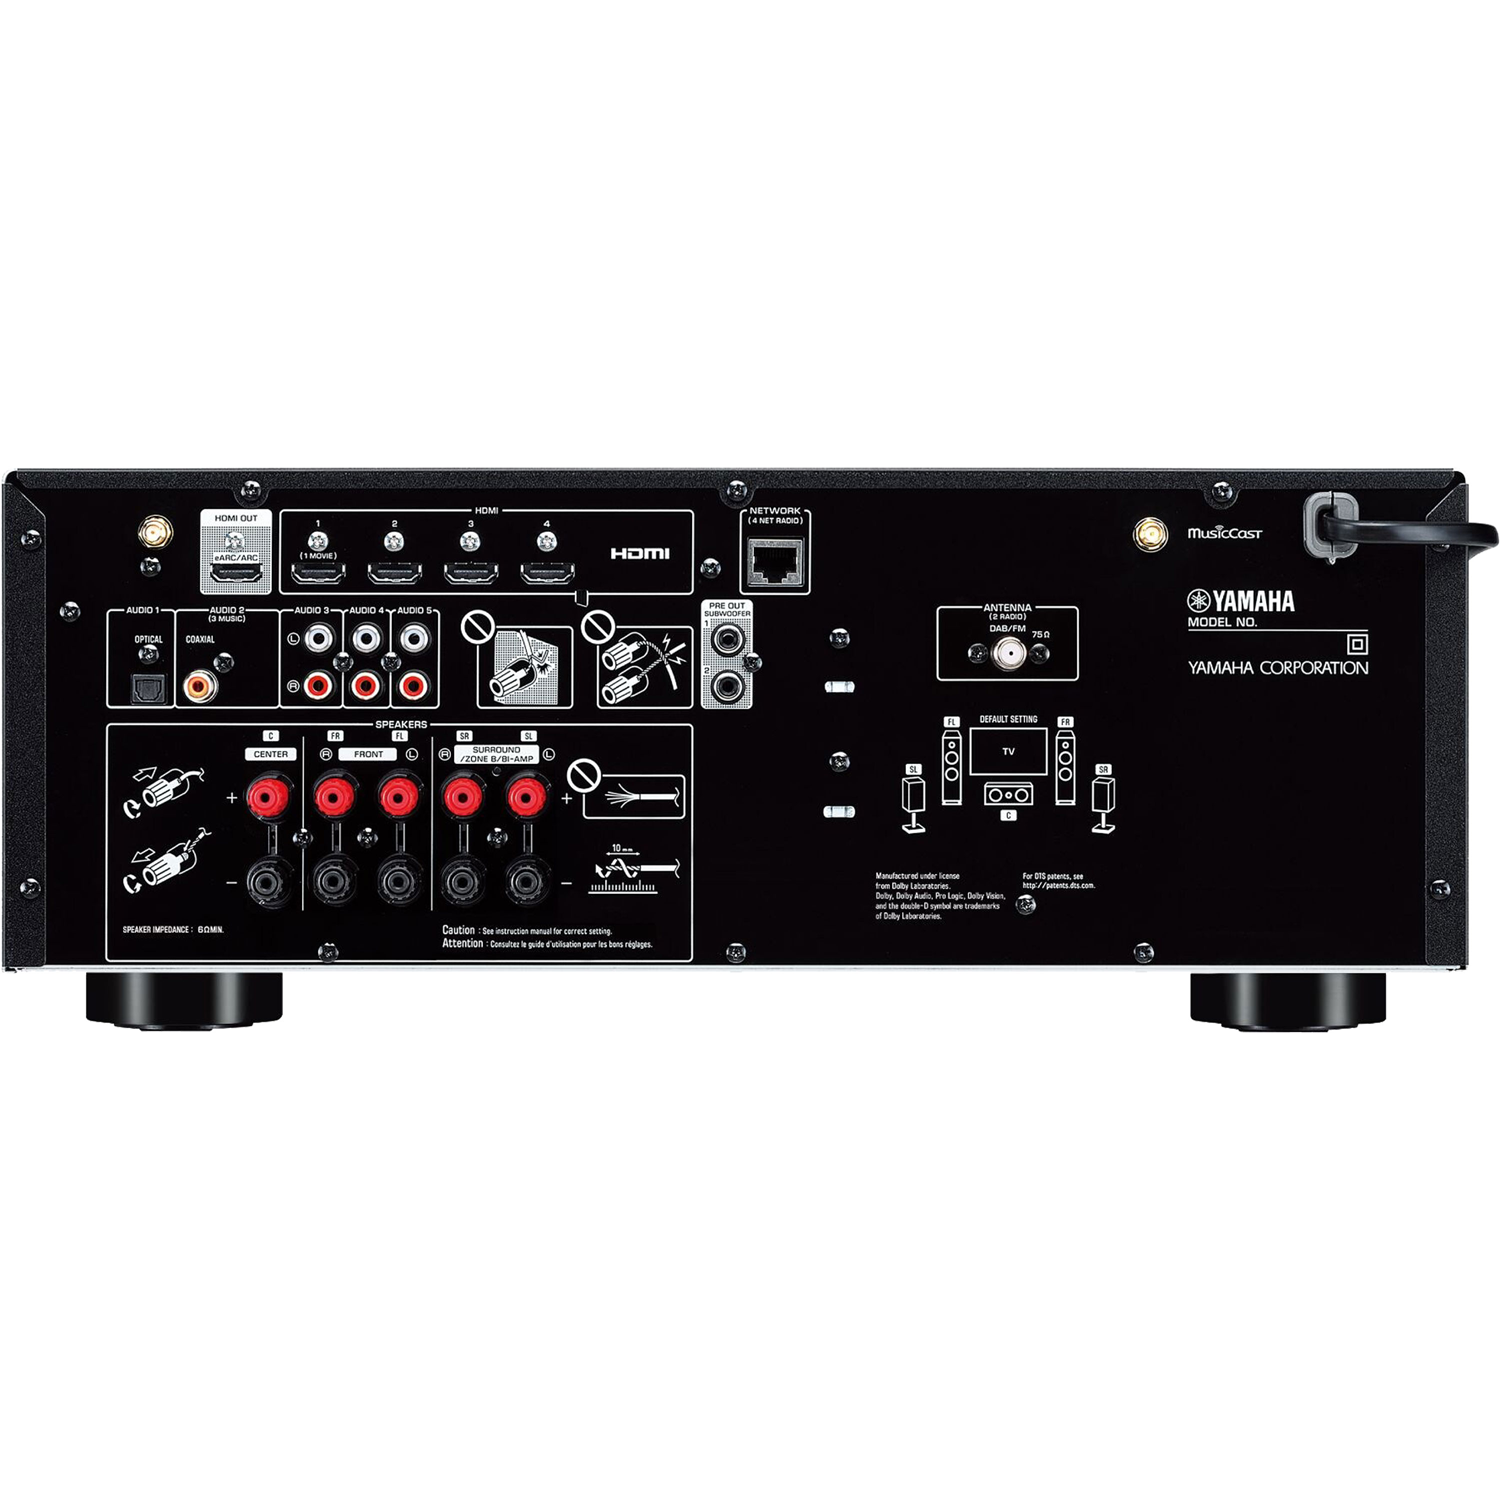 Vochtig Promotie tyfoon YAMAHA RX-V4A 5.2-Ch x 80 Watts 8K A/V Receiver | Accessories4less